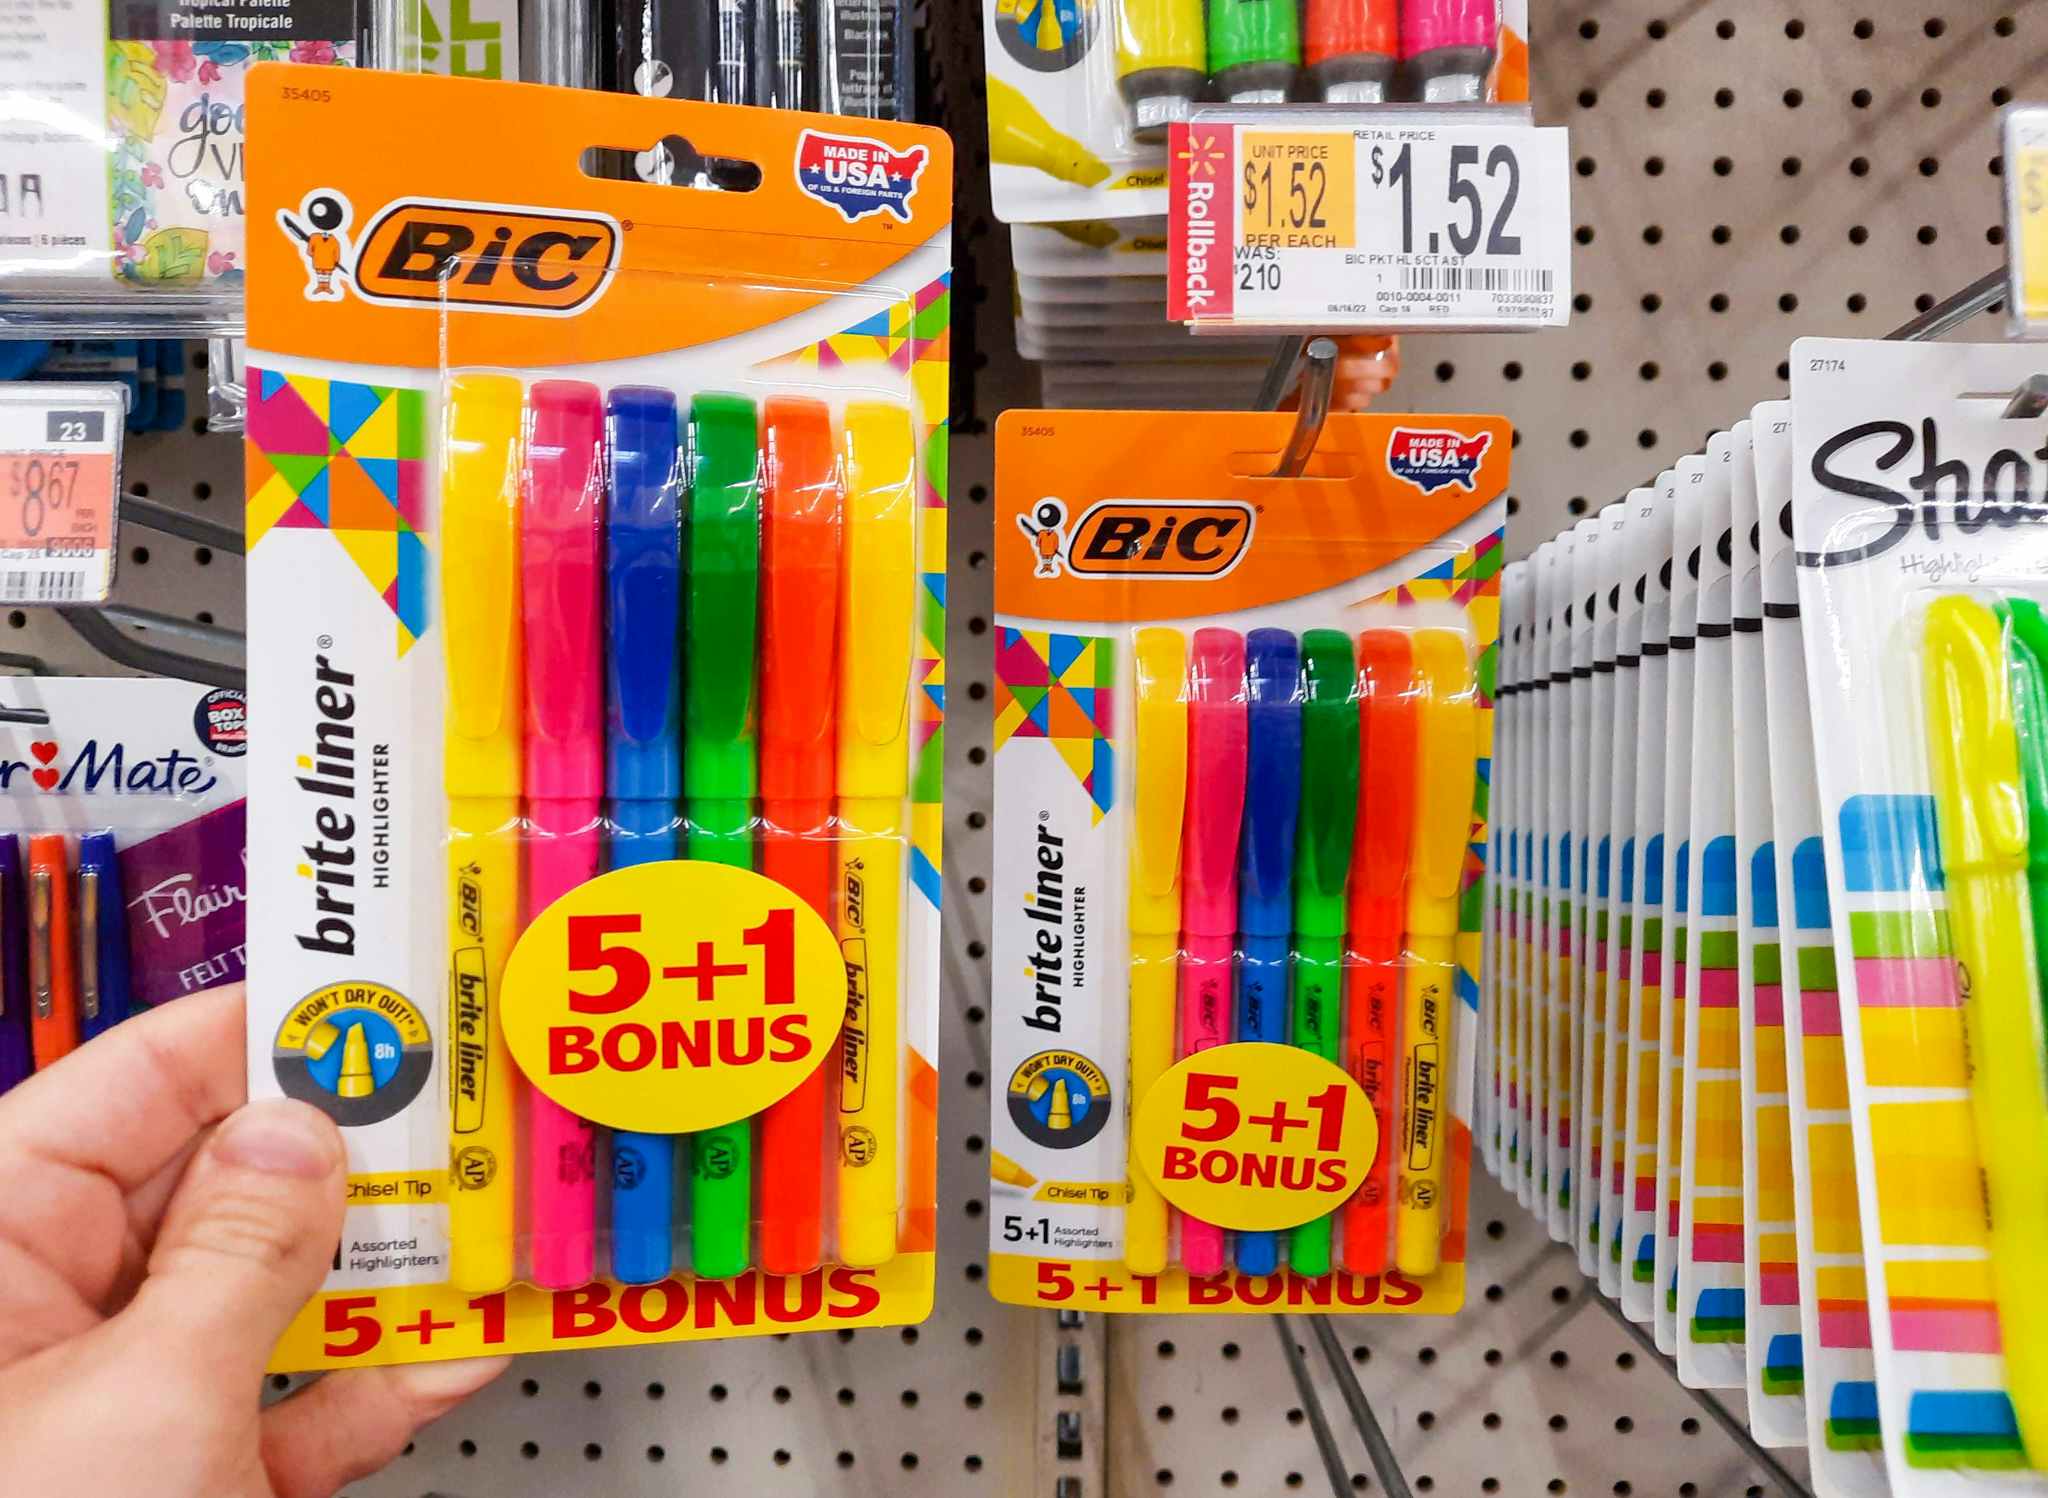 Bic Brite Liner Highlighters held in front of shelf at Walmart. Rollback price tag shows that the price is $1.52, regularly $2.10.